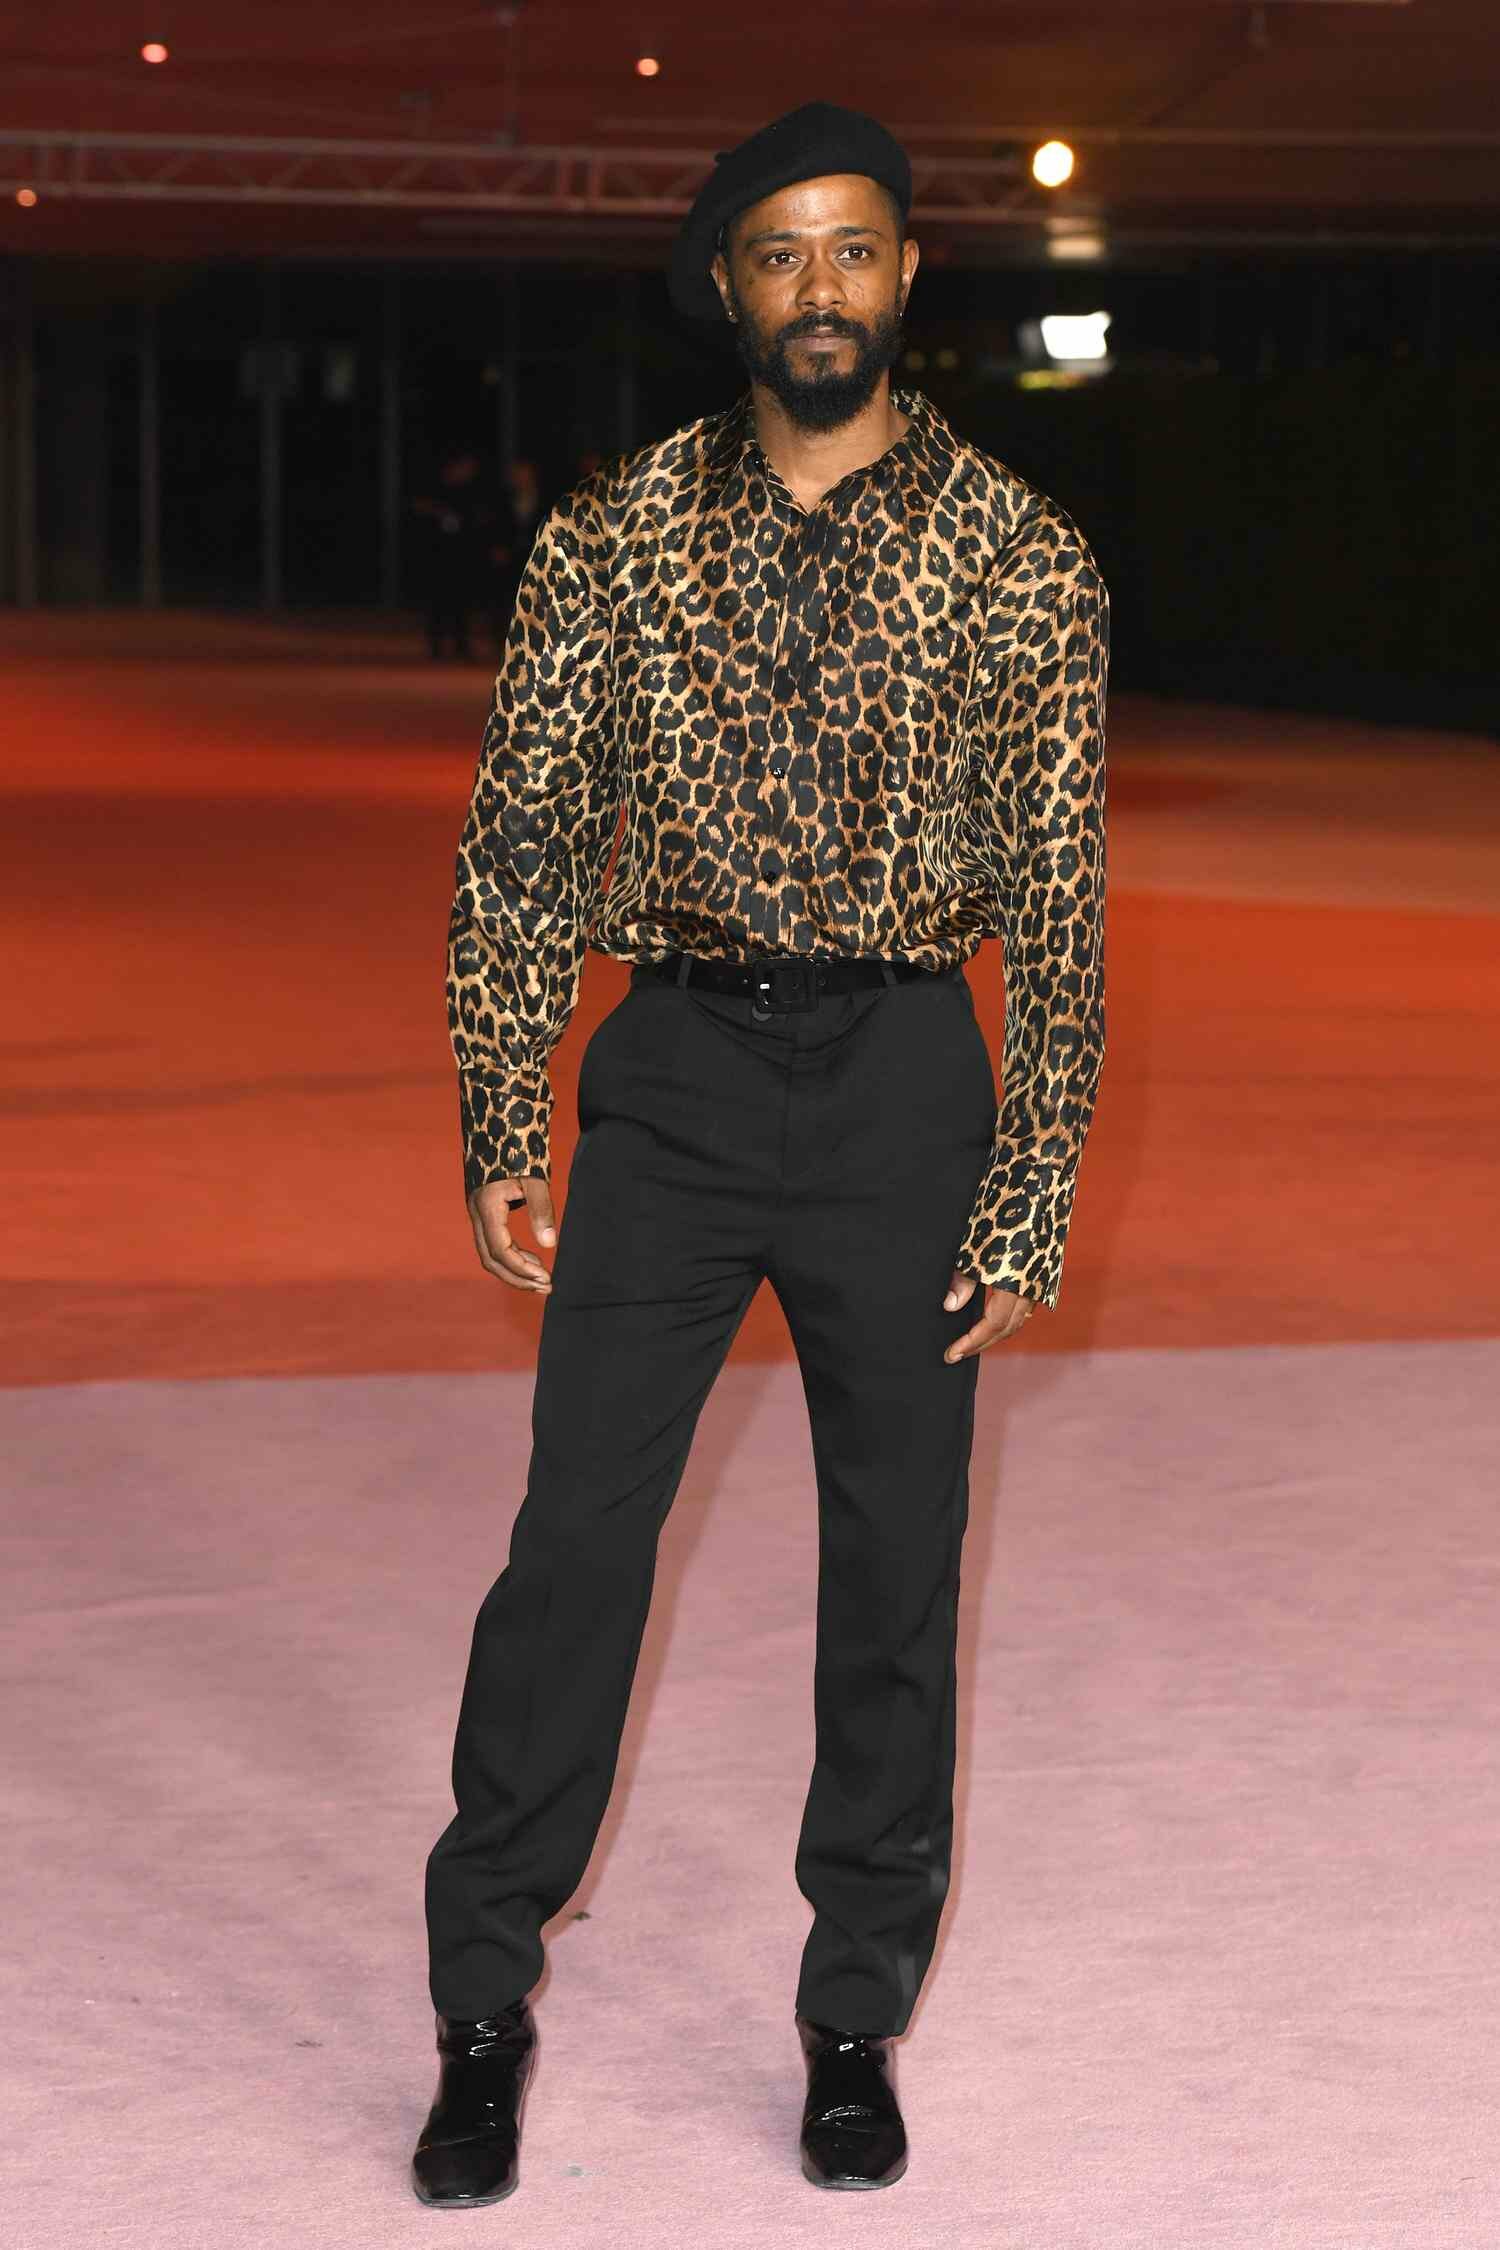 LaKeith Stanfield 2023 Annual Academy Museum Gala at Academy Museum of Motion Pictures 